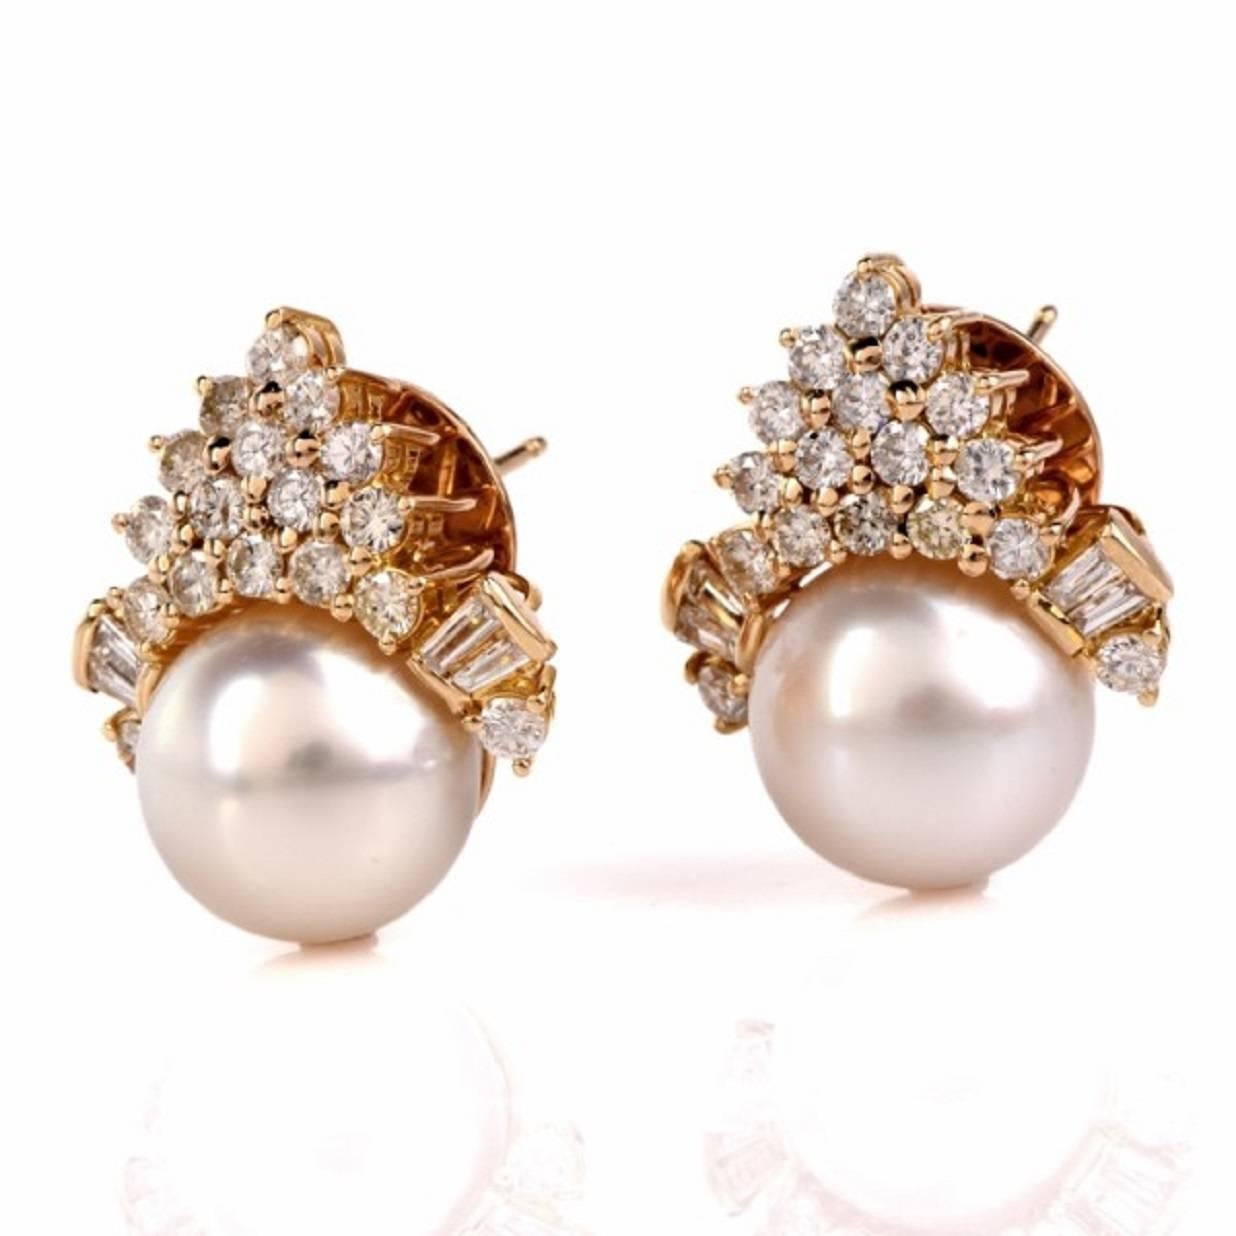 These enchantingly elegant and highly sparkling  estate earrings of sophisticated aesthetic are crafted in solid 18K yellow gold, weigh 19.1 grams and measure 23 x 21 mm. These alluring earrings  incorporate a pair of   lustrous South Sea pearls of